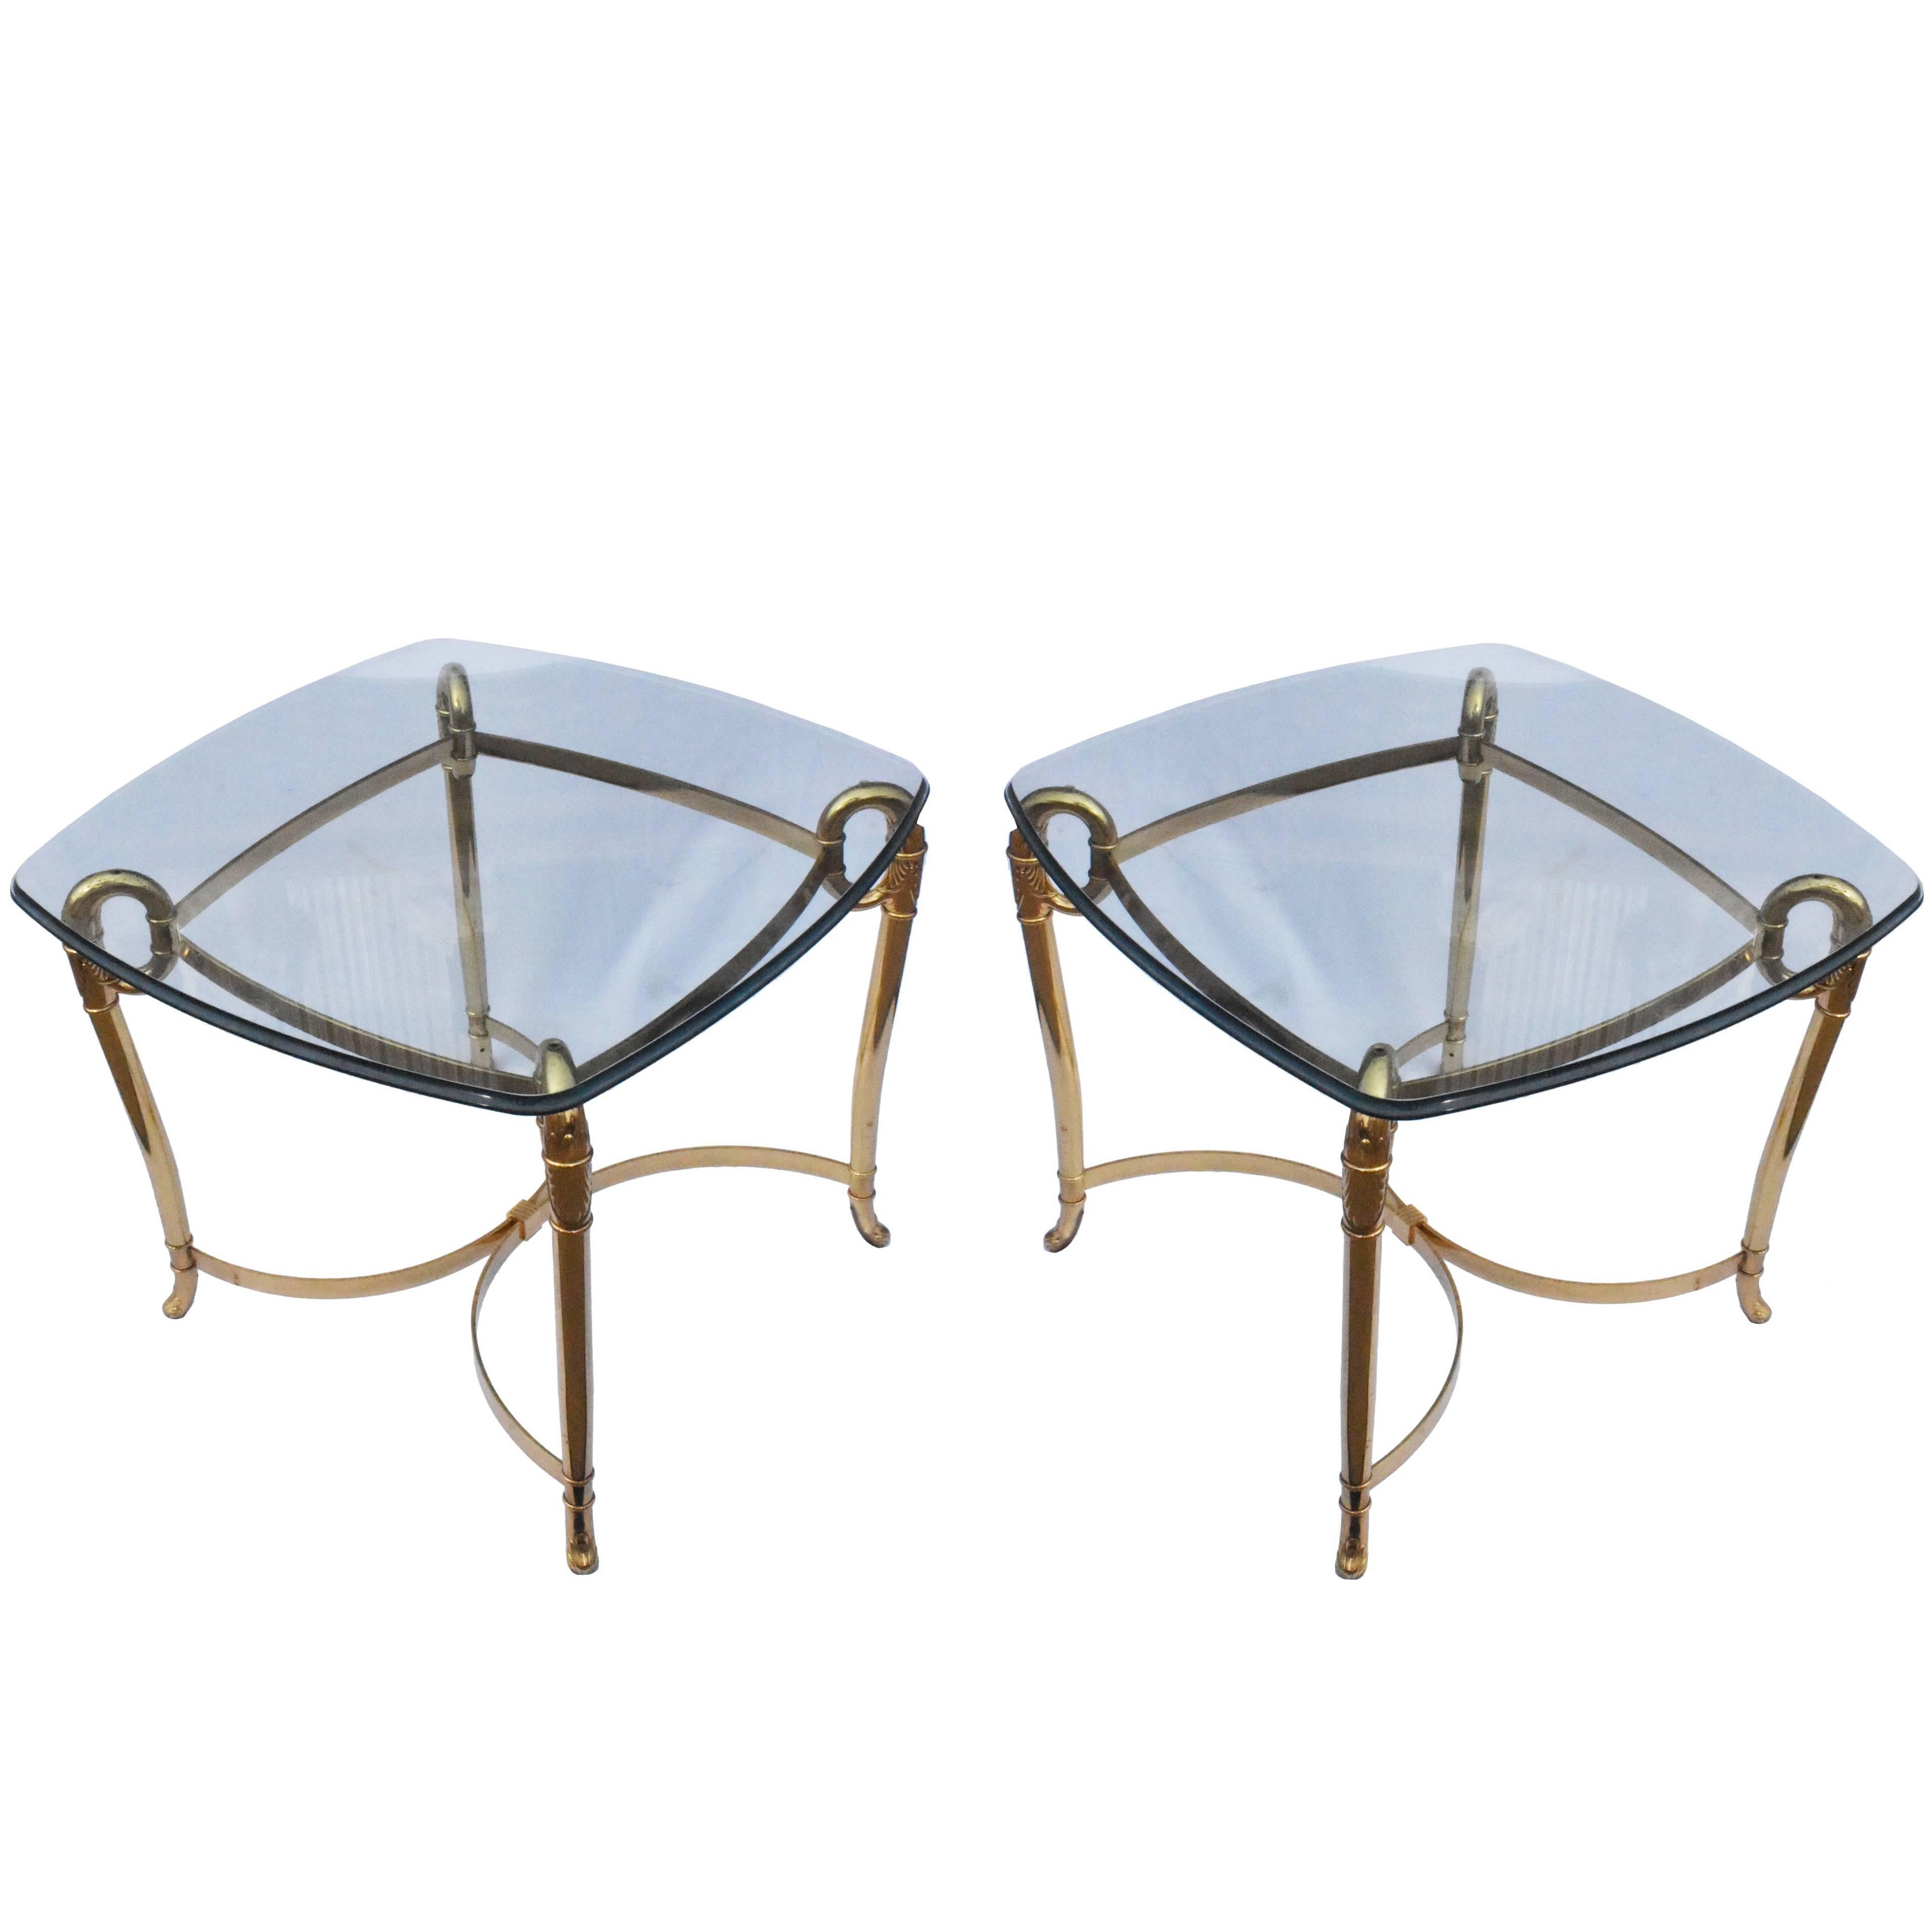 Italian, 1980s Pair of Bronze Side Tables with Glass Tops